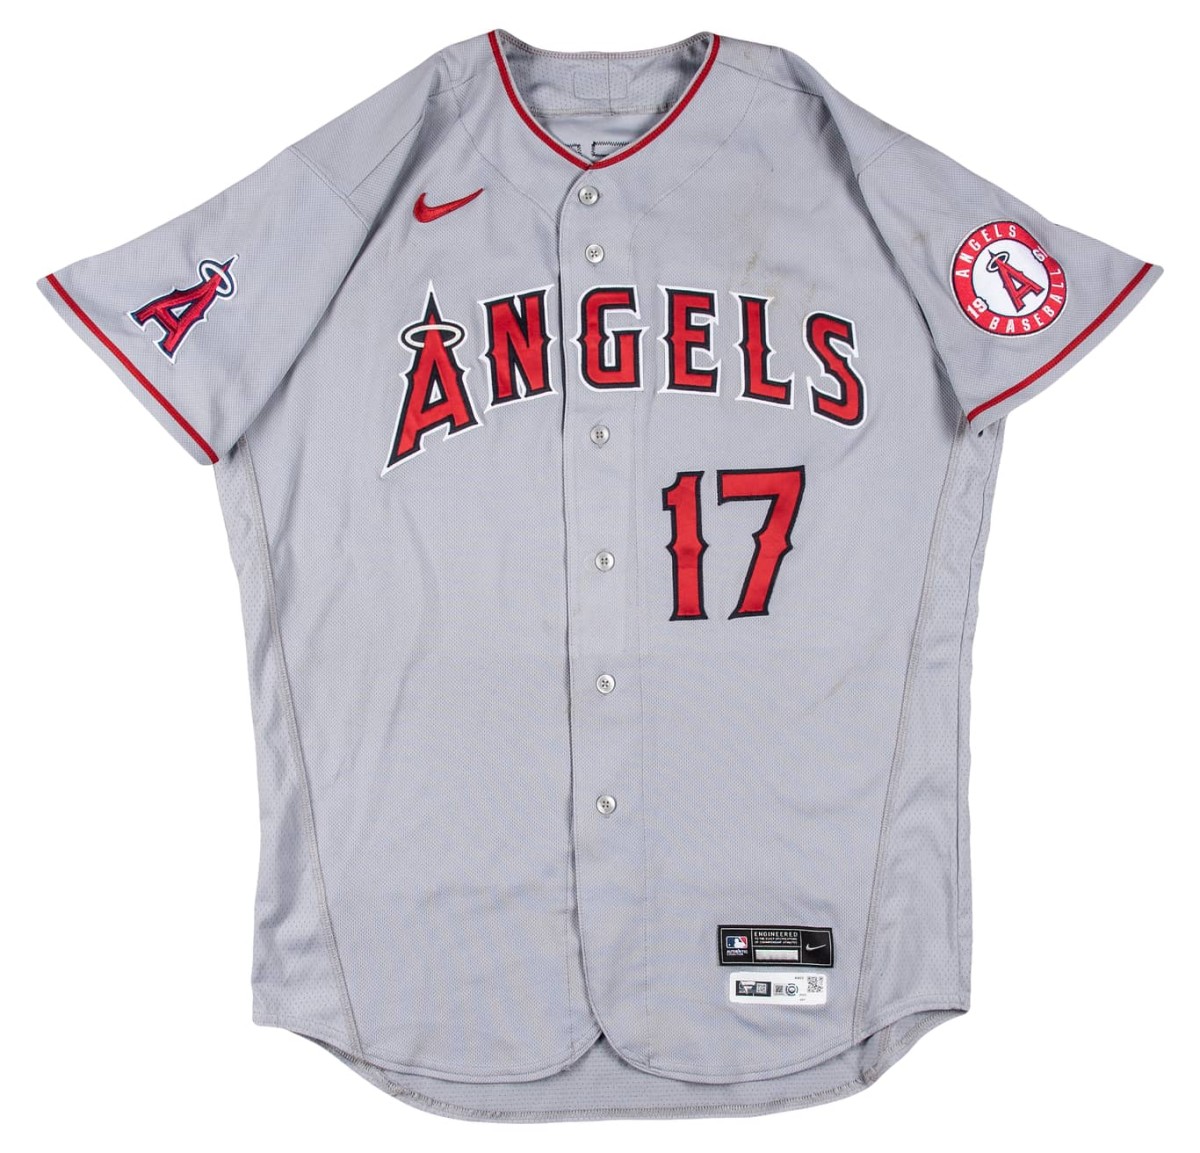 Angels jersey auction